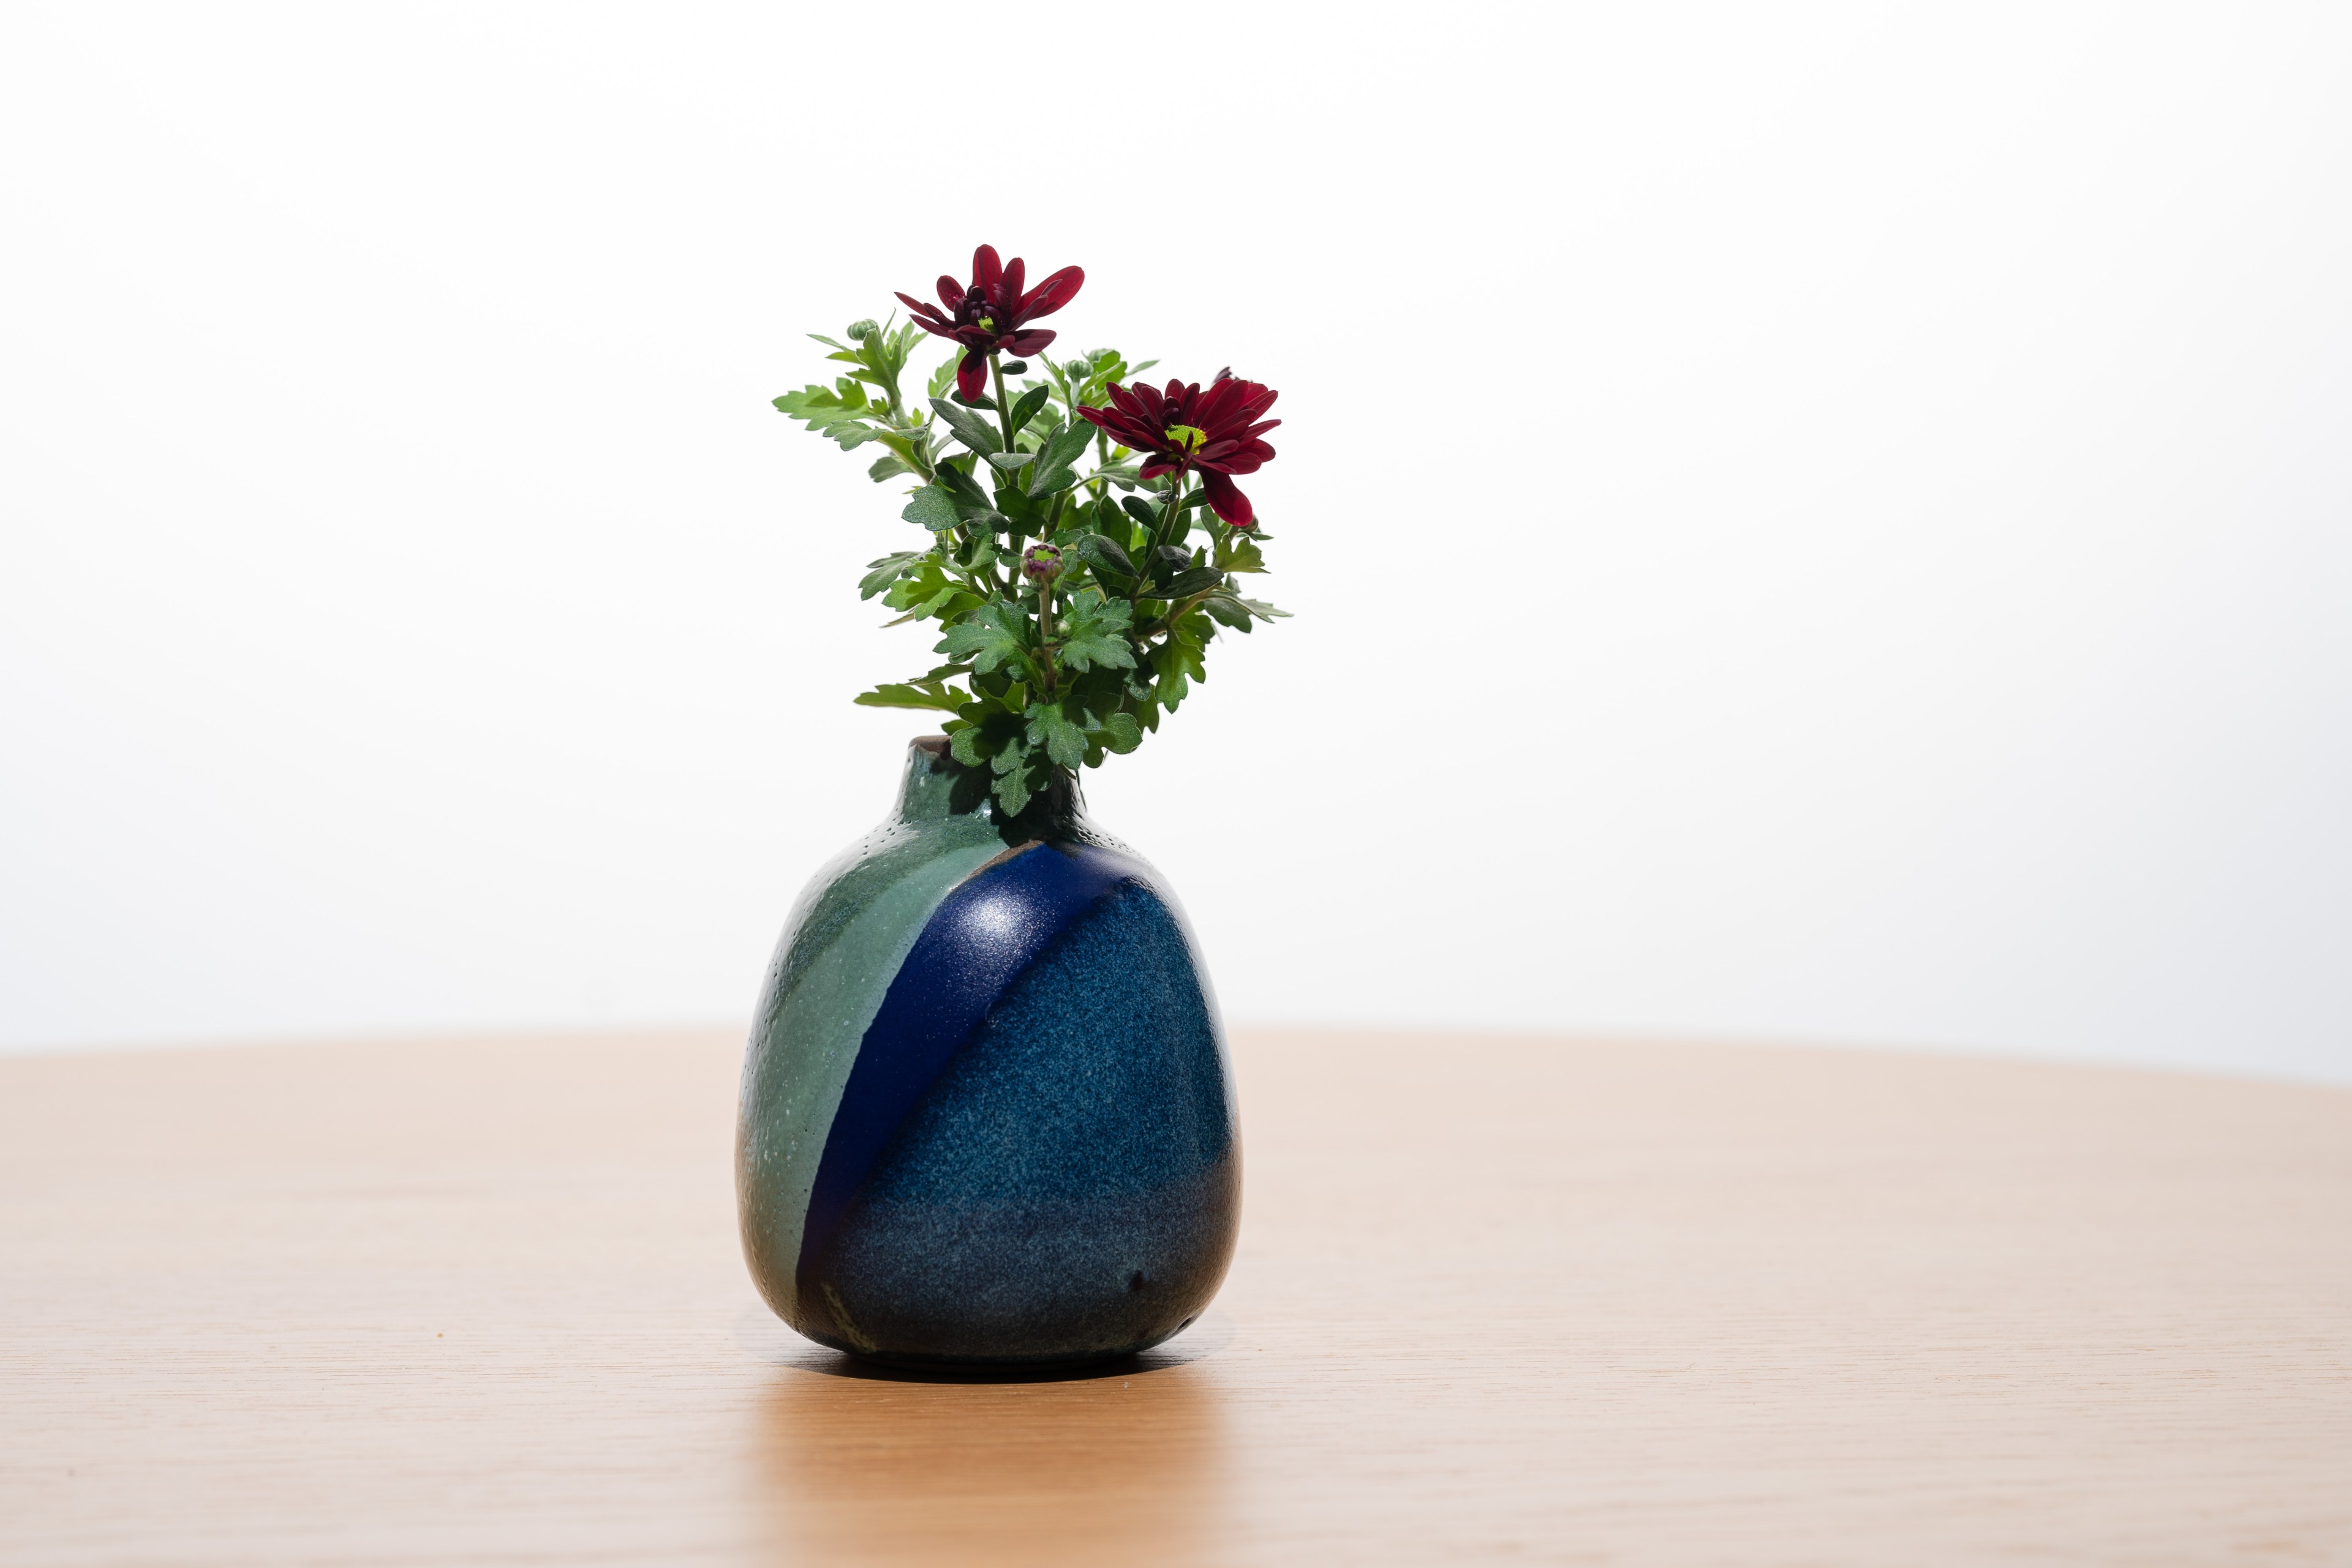 A blue and green ceramic vase with red flowers sits on a wooden table against a white background.